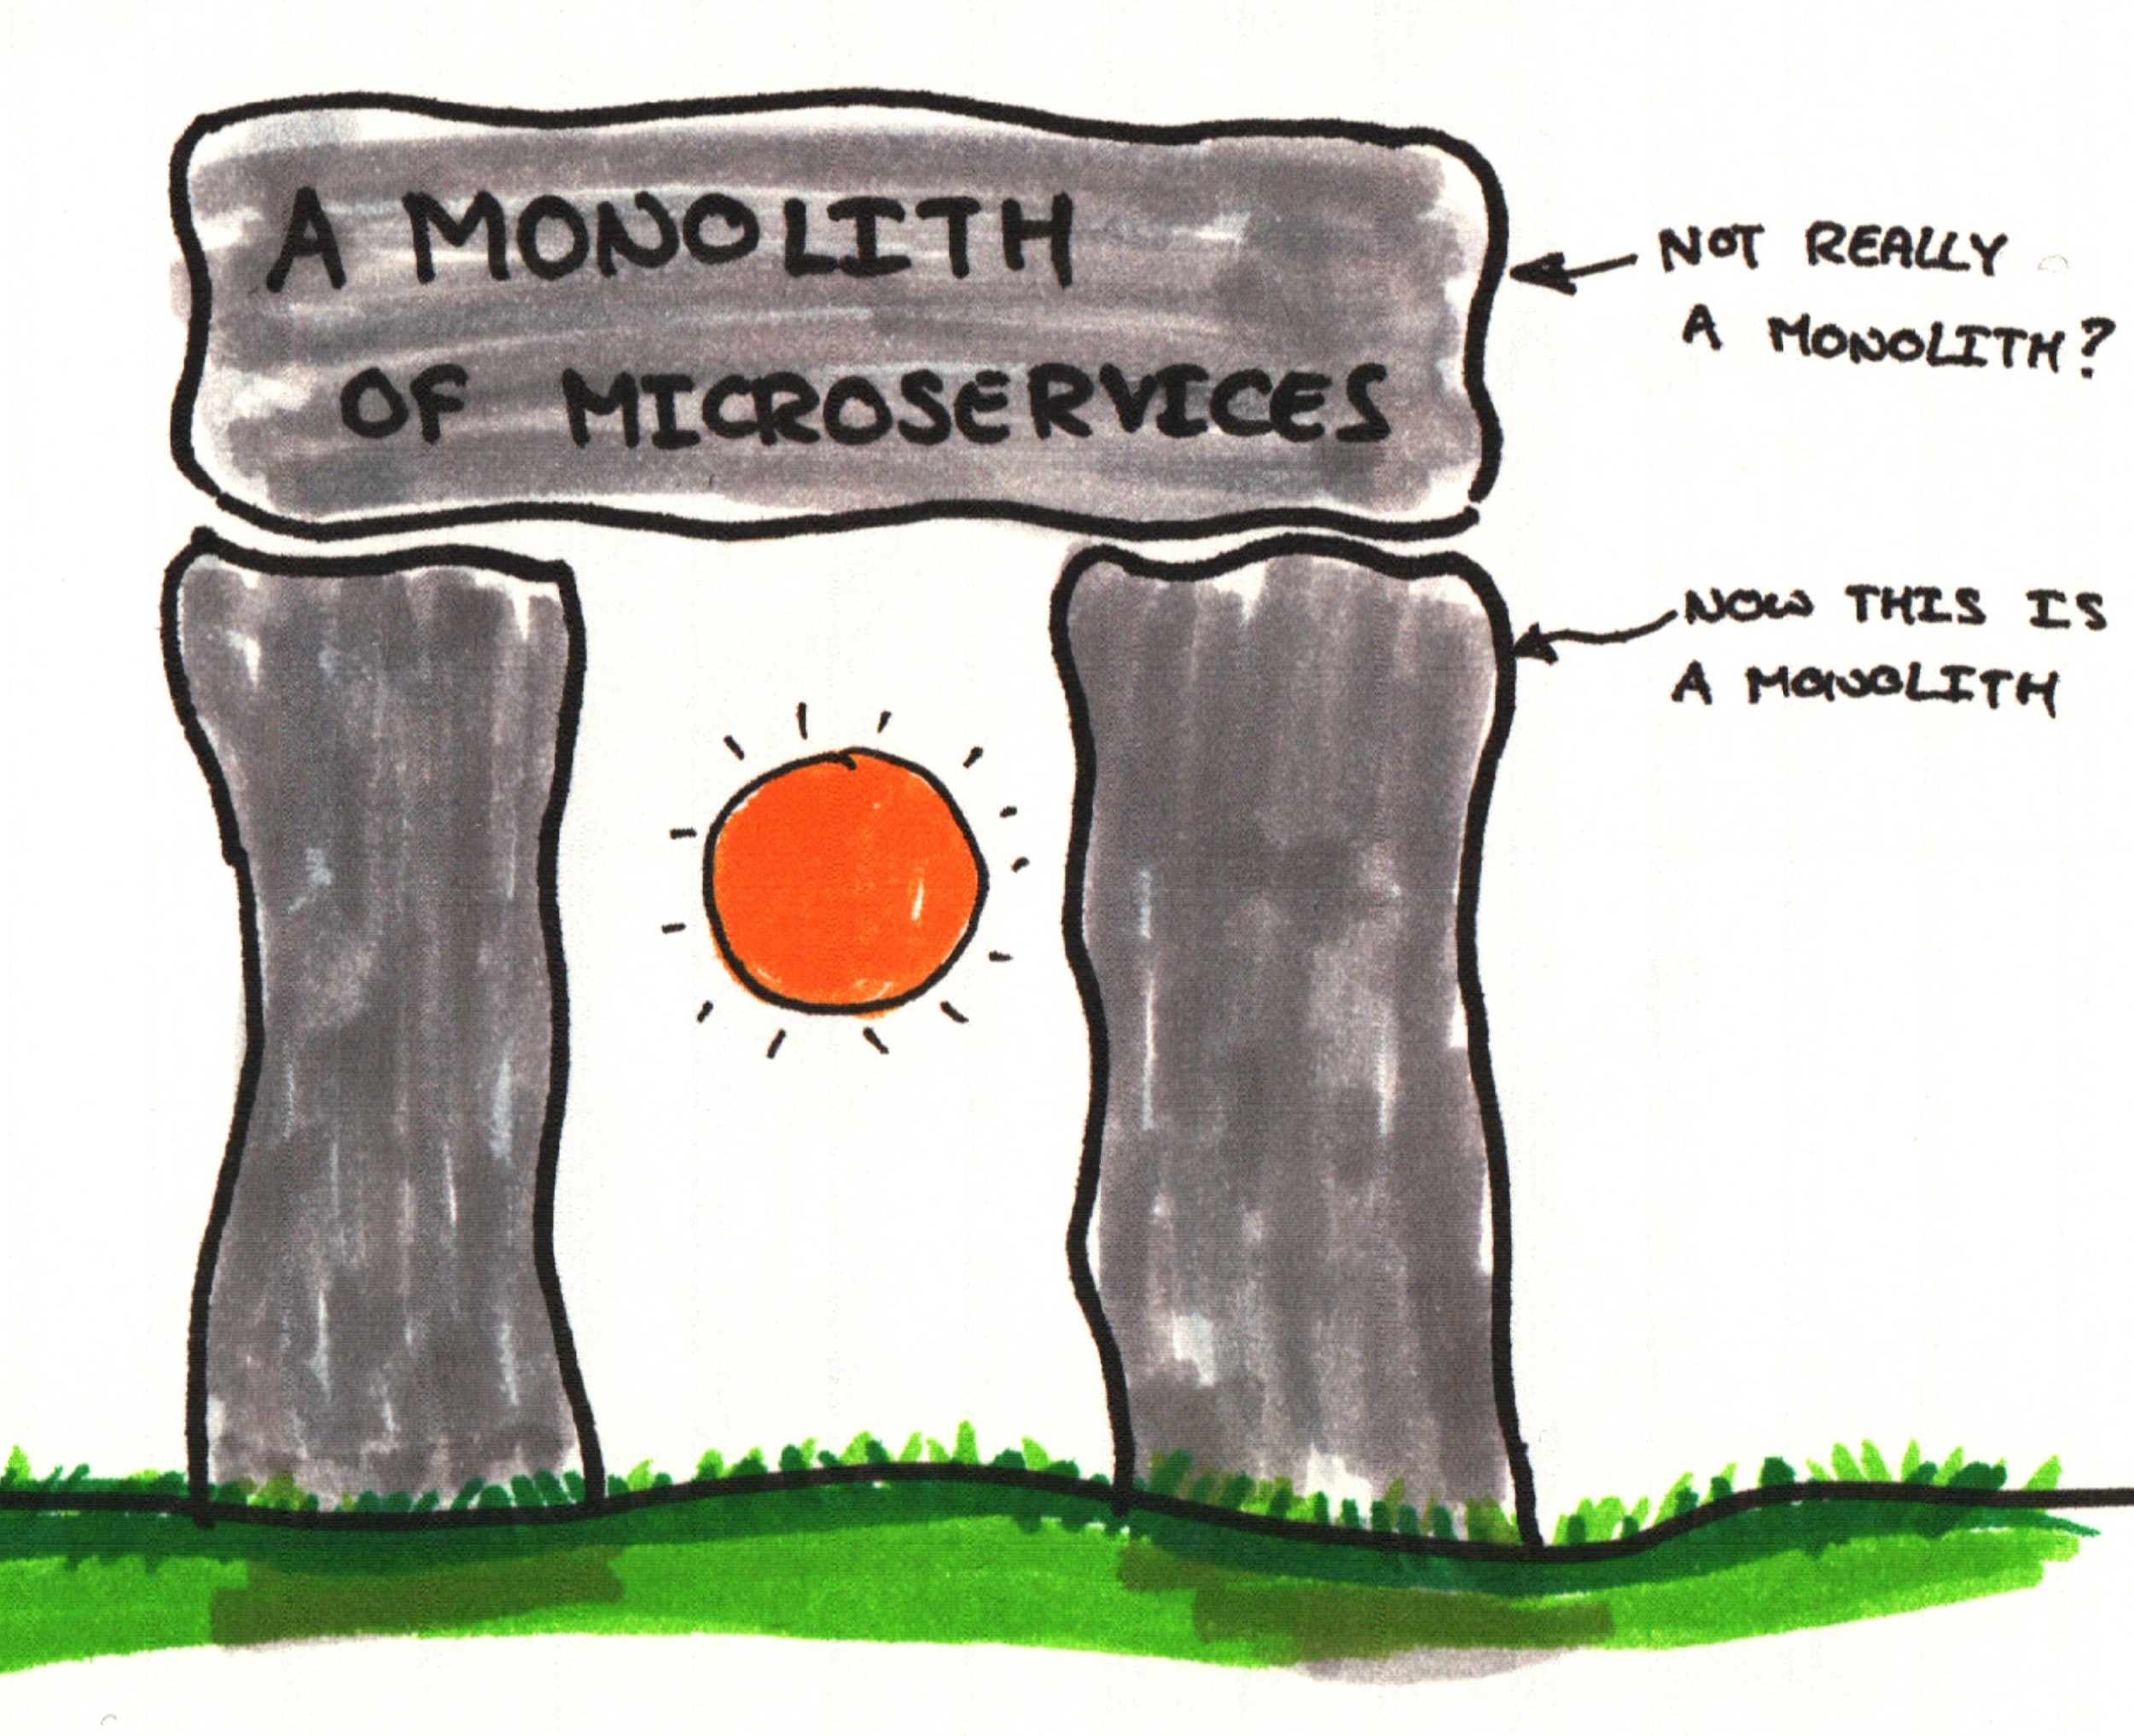 First slide from the talk, Stonehenge representing a monolith